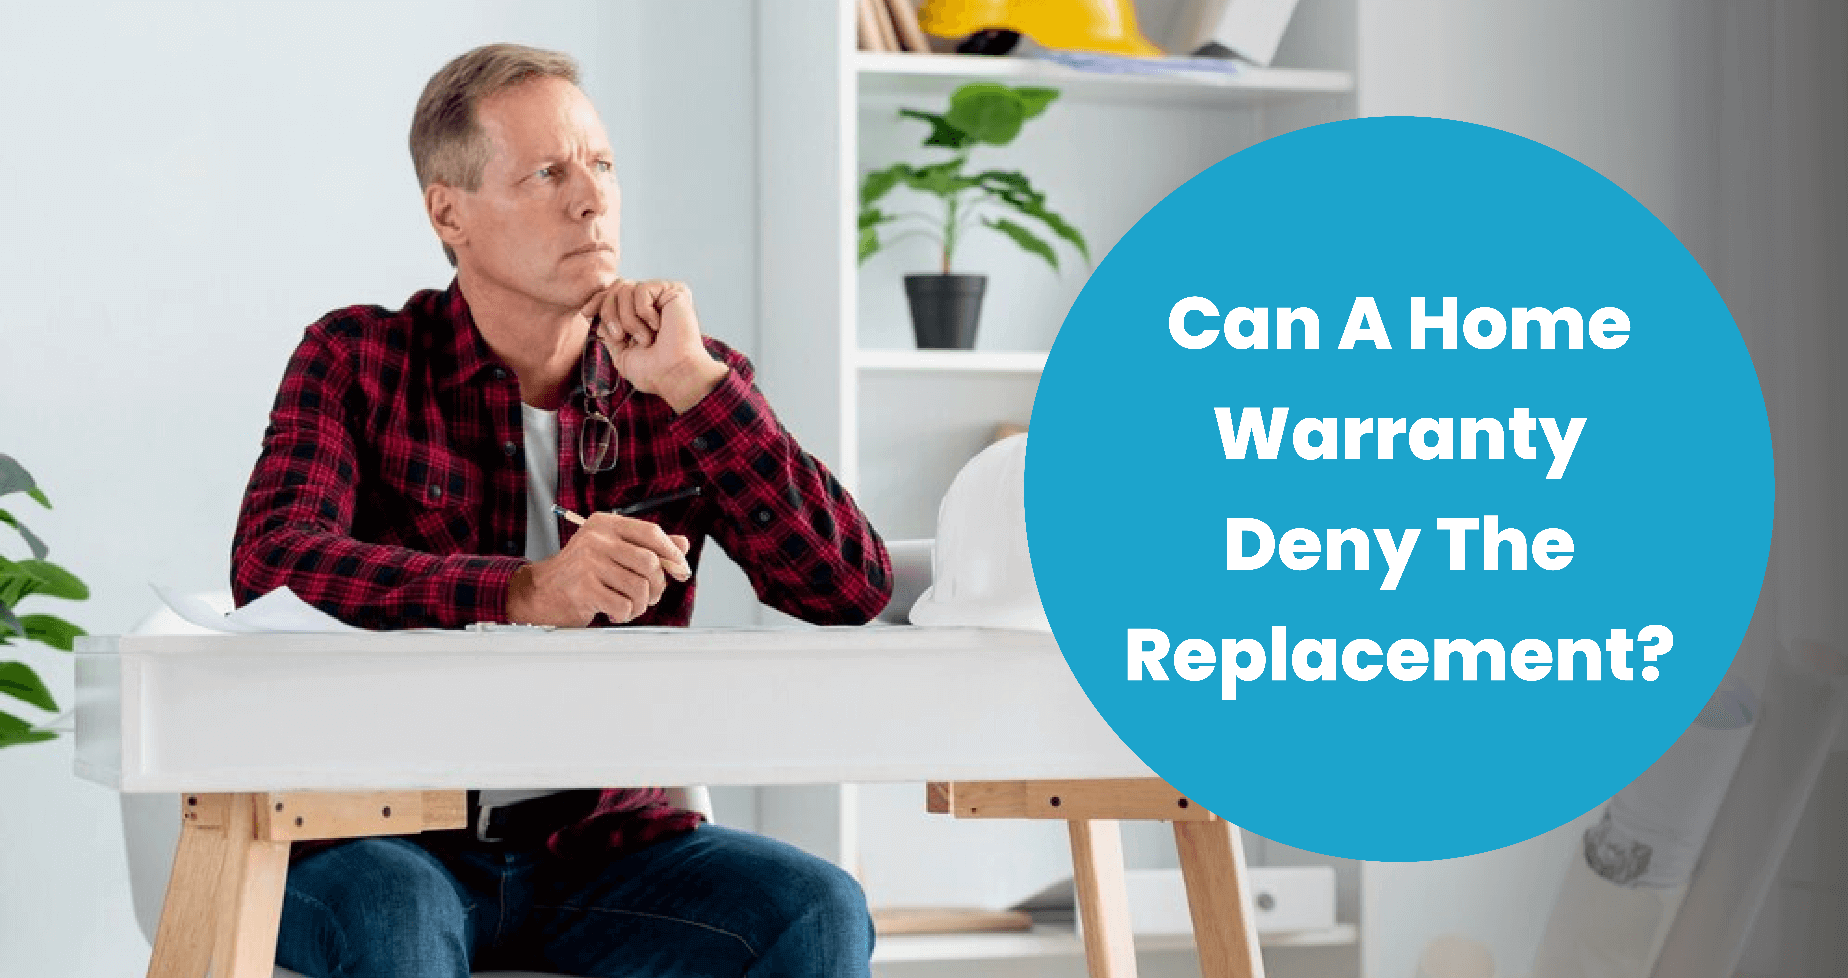 Can A Home Warranty Deny The Replacement?